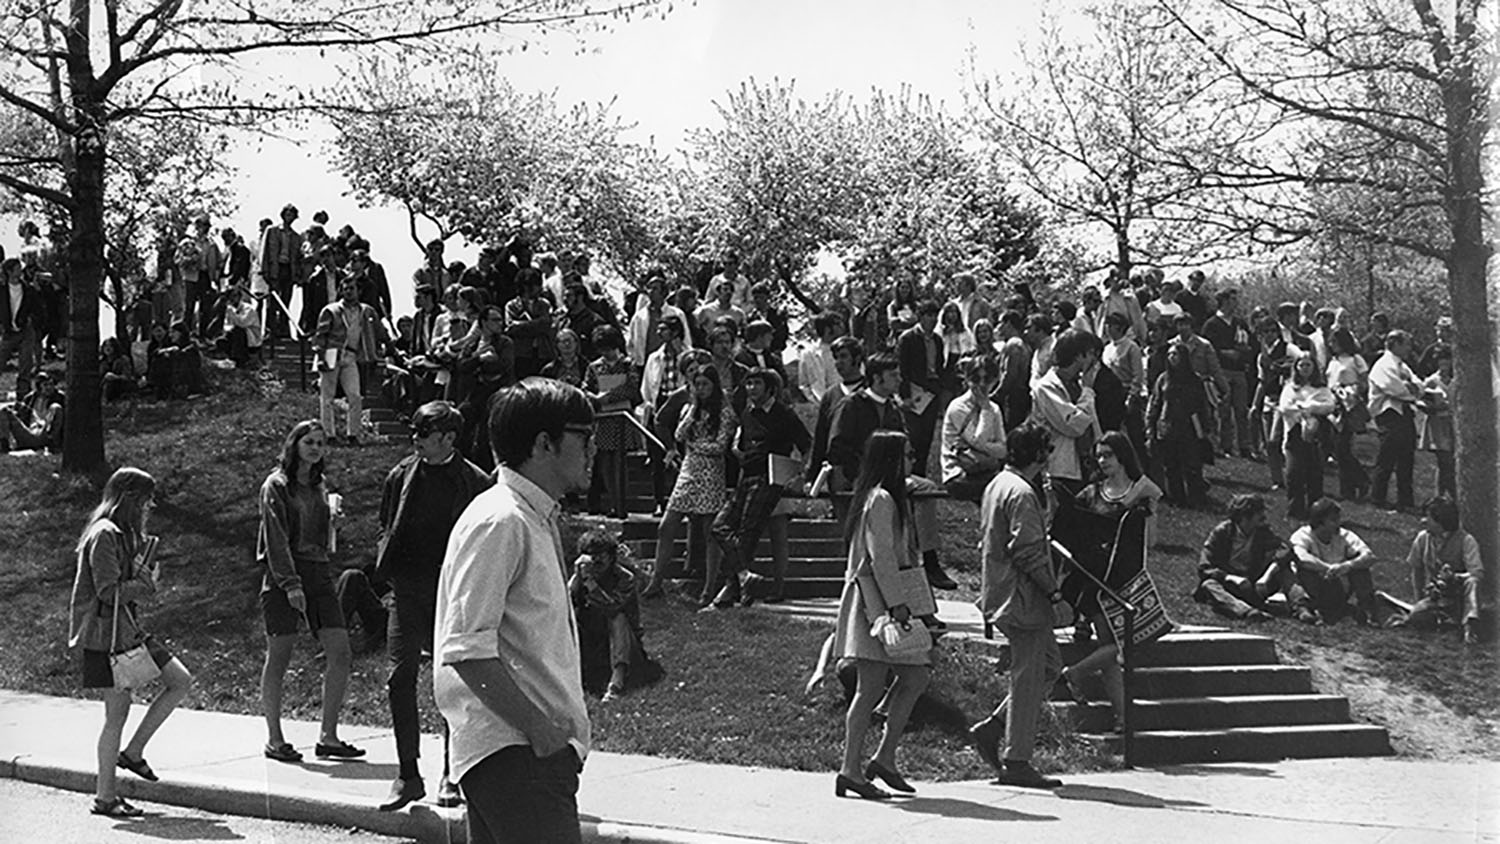 Explore the Kent State Shootings Digital Archive (photo by Henry Halem)